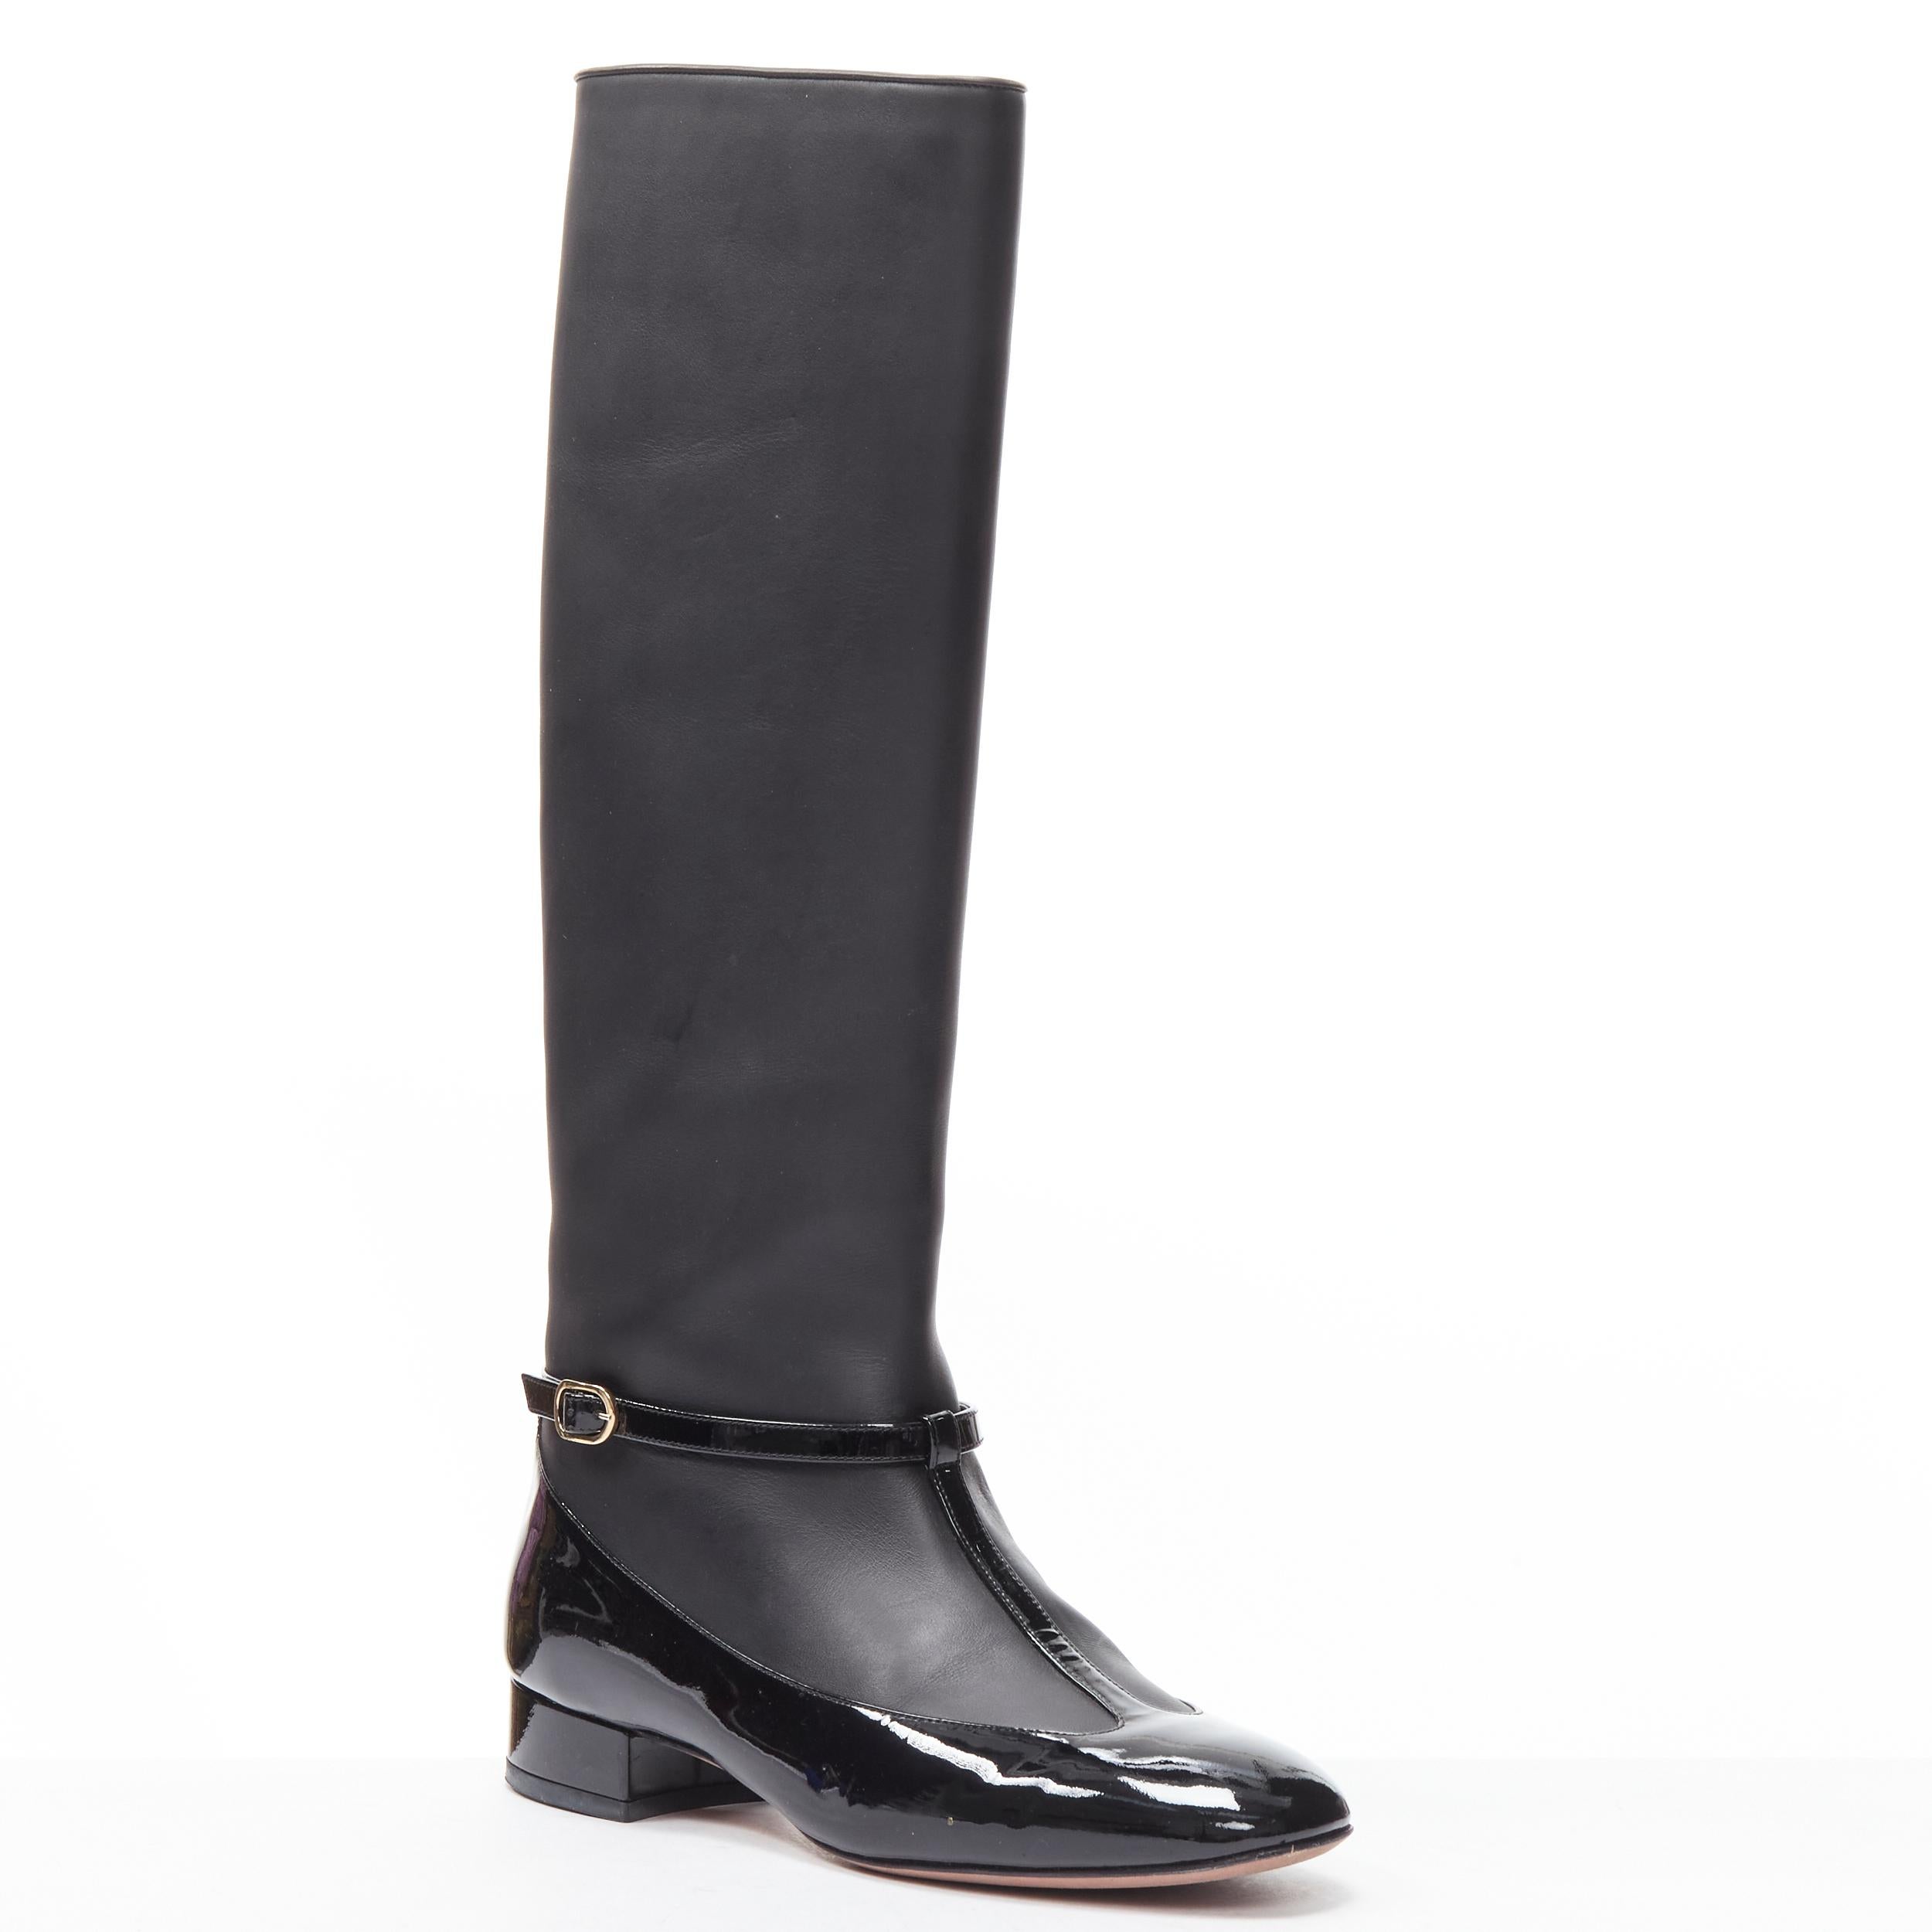 VALENTINO black patent T-strap Mary Jane leather pull on boot EU38
Reference: MELK/A00233
Brand: Valentino
Material: Leather
Color: Black
Pattern: Solid
Closure: Buckle
Extra Detail: Gold-tone hardware. 
Made in: Italy

CONDITION:
Condition: